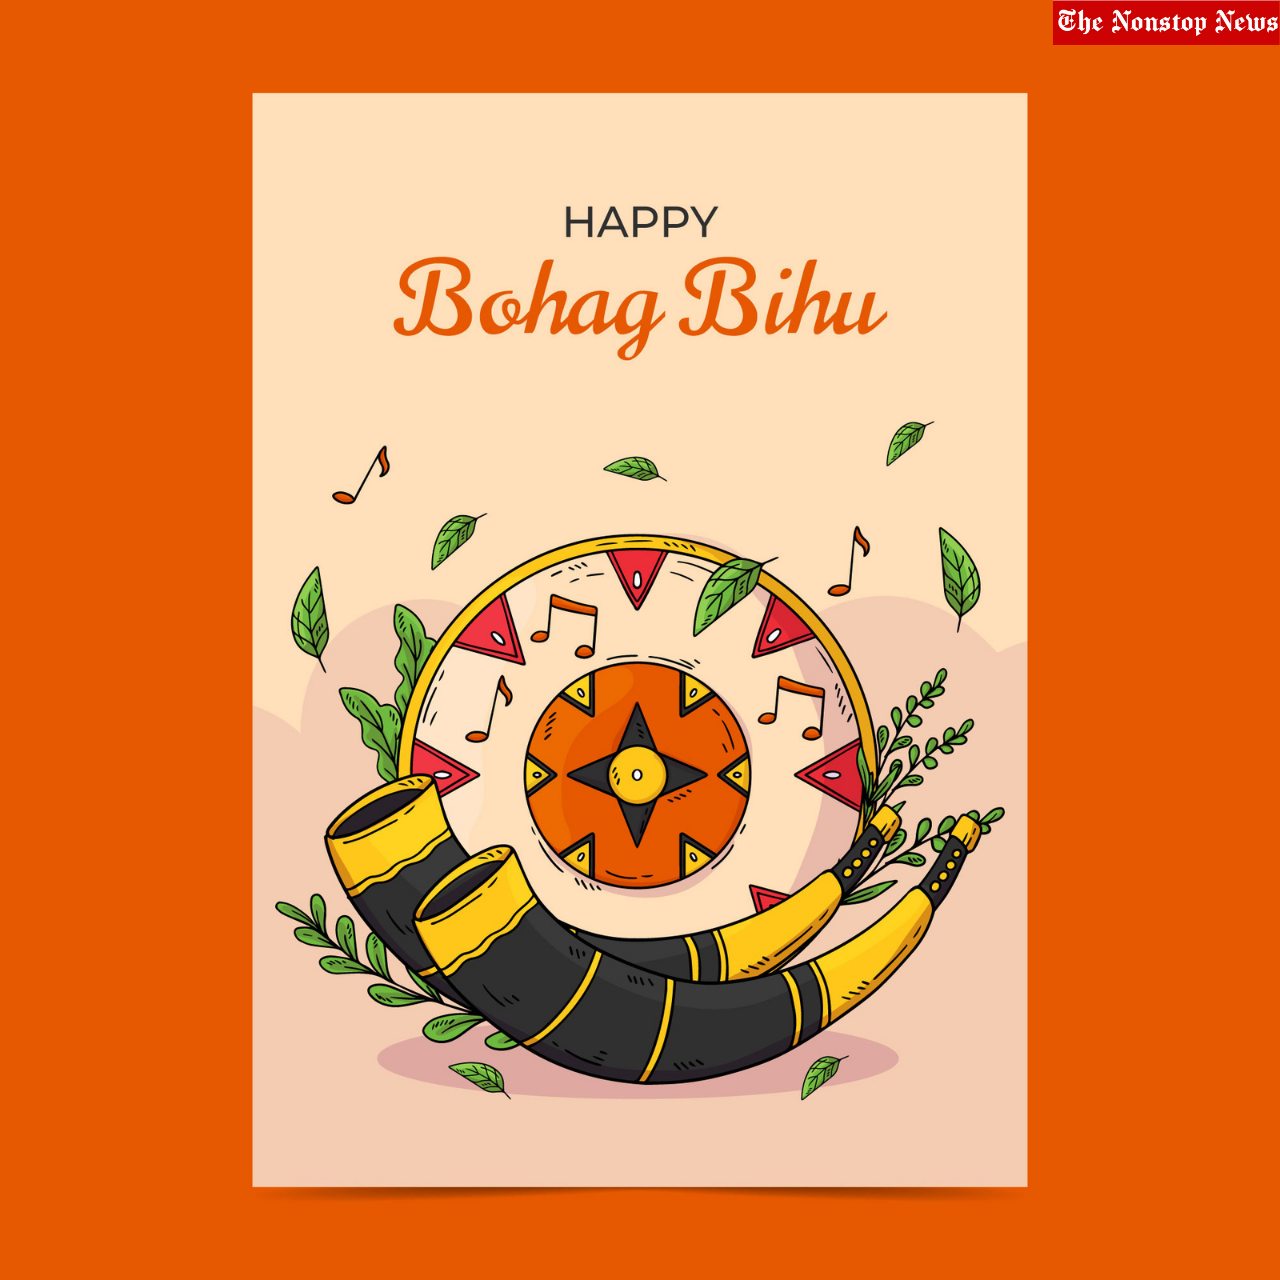 Bohag Bihu 2022: Best Wishes, Messages, Quotes, Greetings, Images To Share